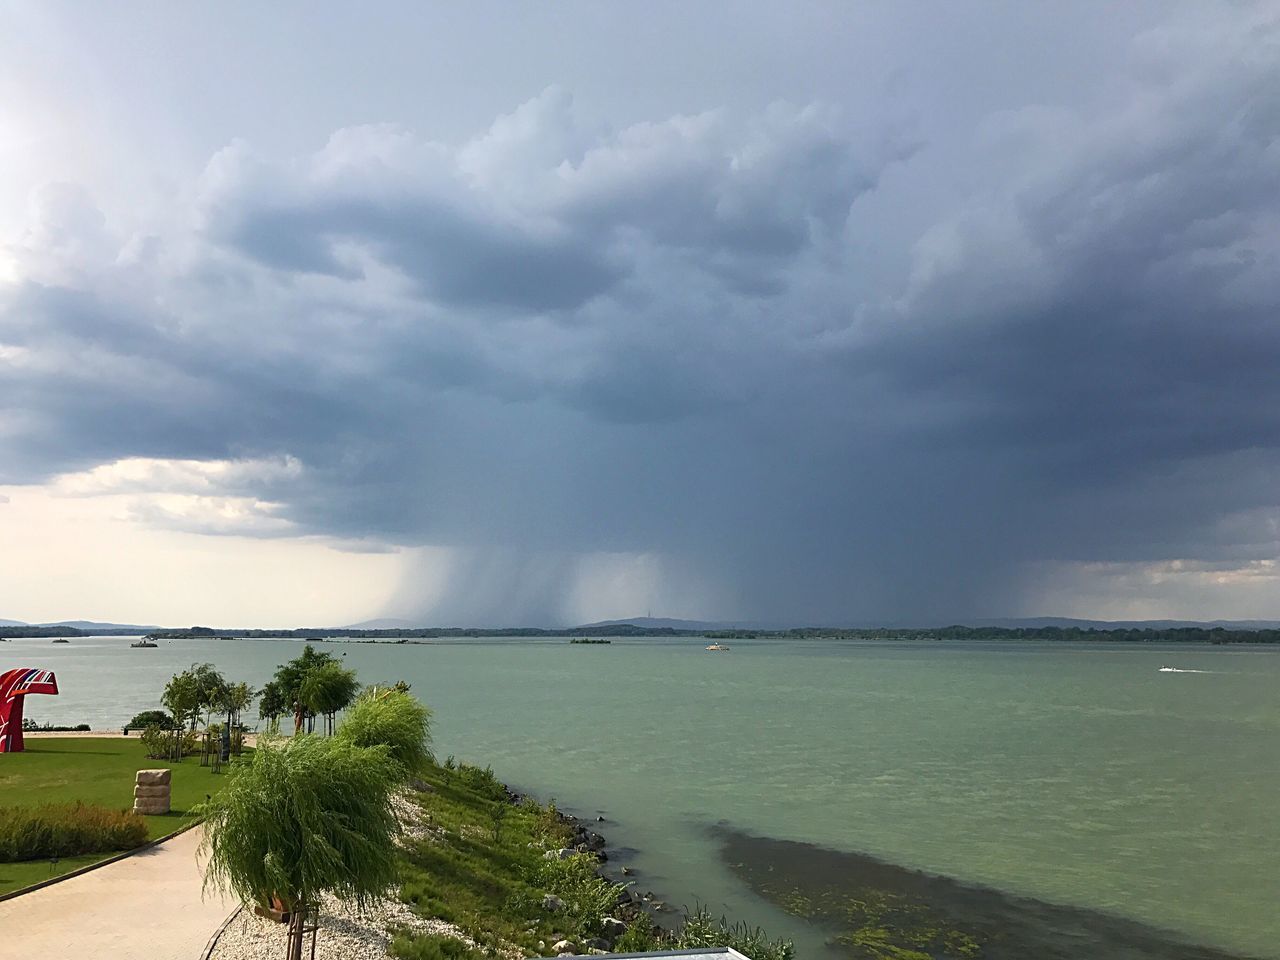 sea, water, cloud - sky, sky, nature, scenics, horizon over water, beauty in nature, day, outdoors, tranquility, no people, storm cloud, beach, tree, architecture, thunderstorm